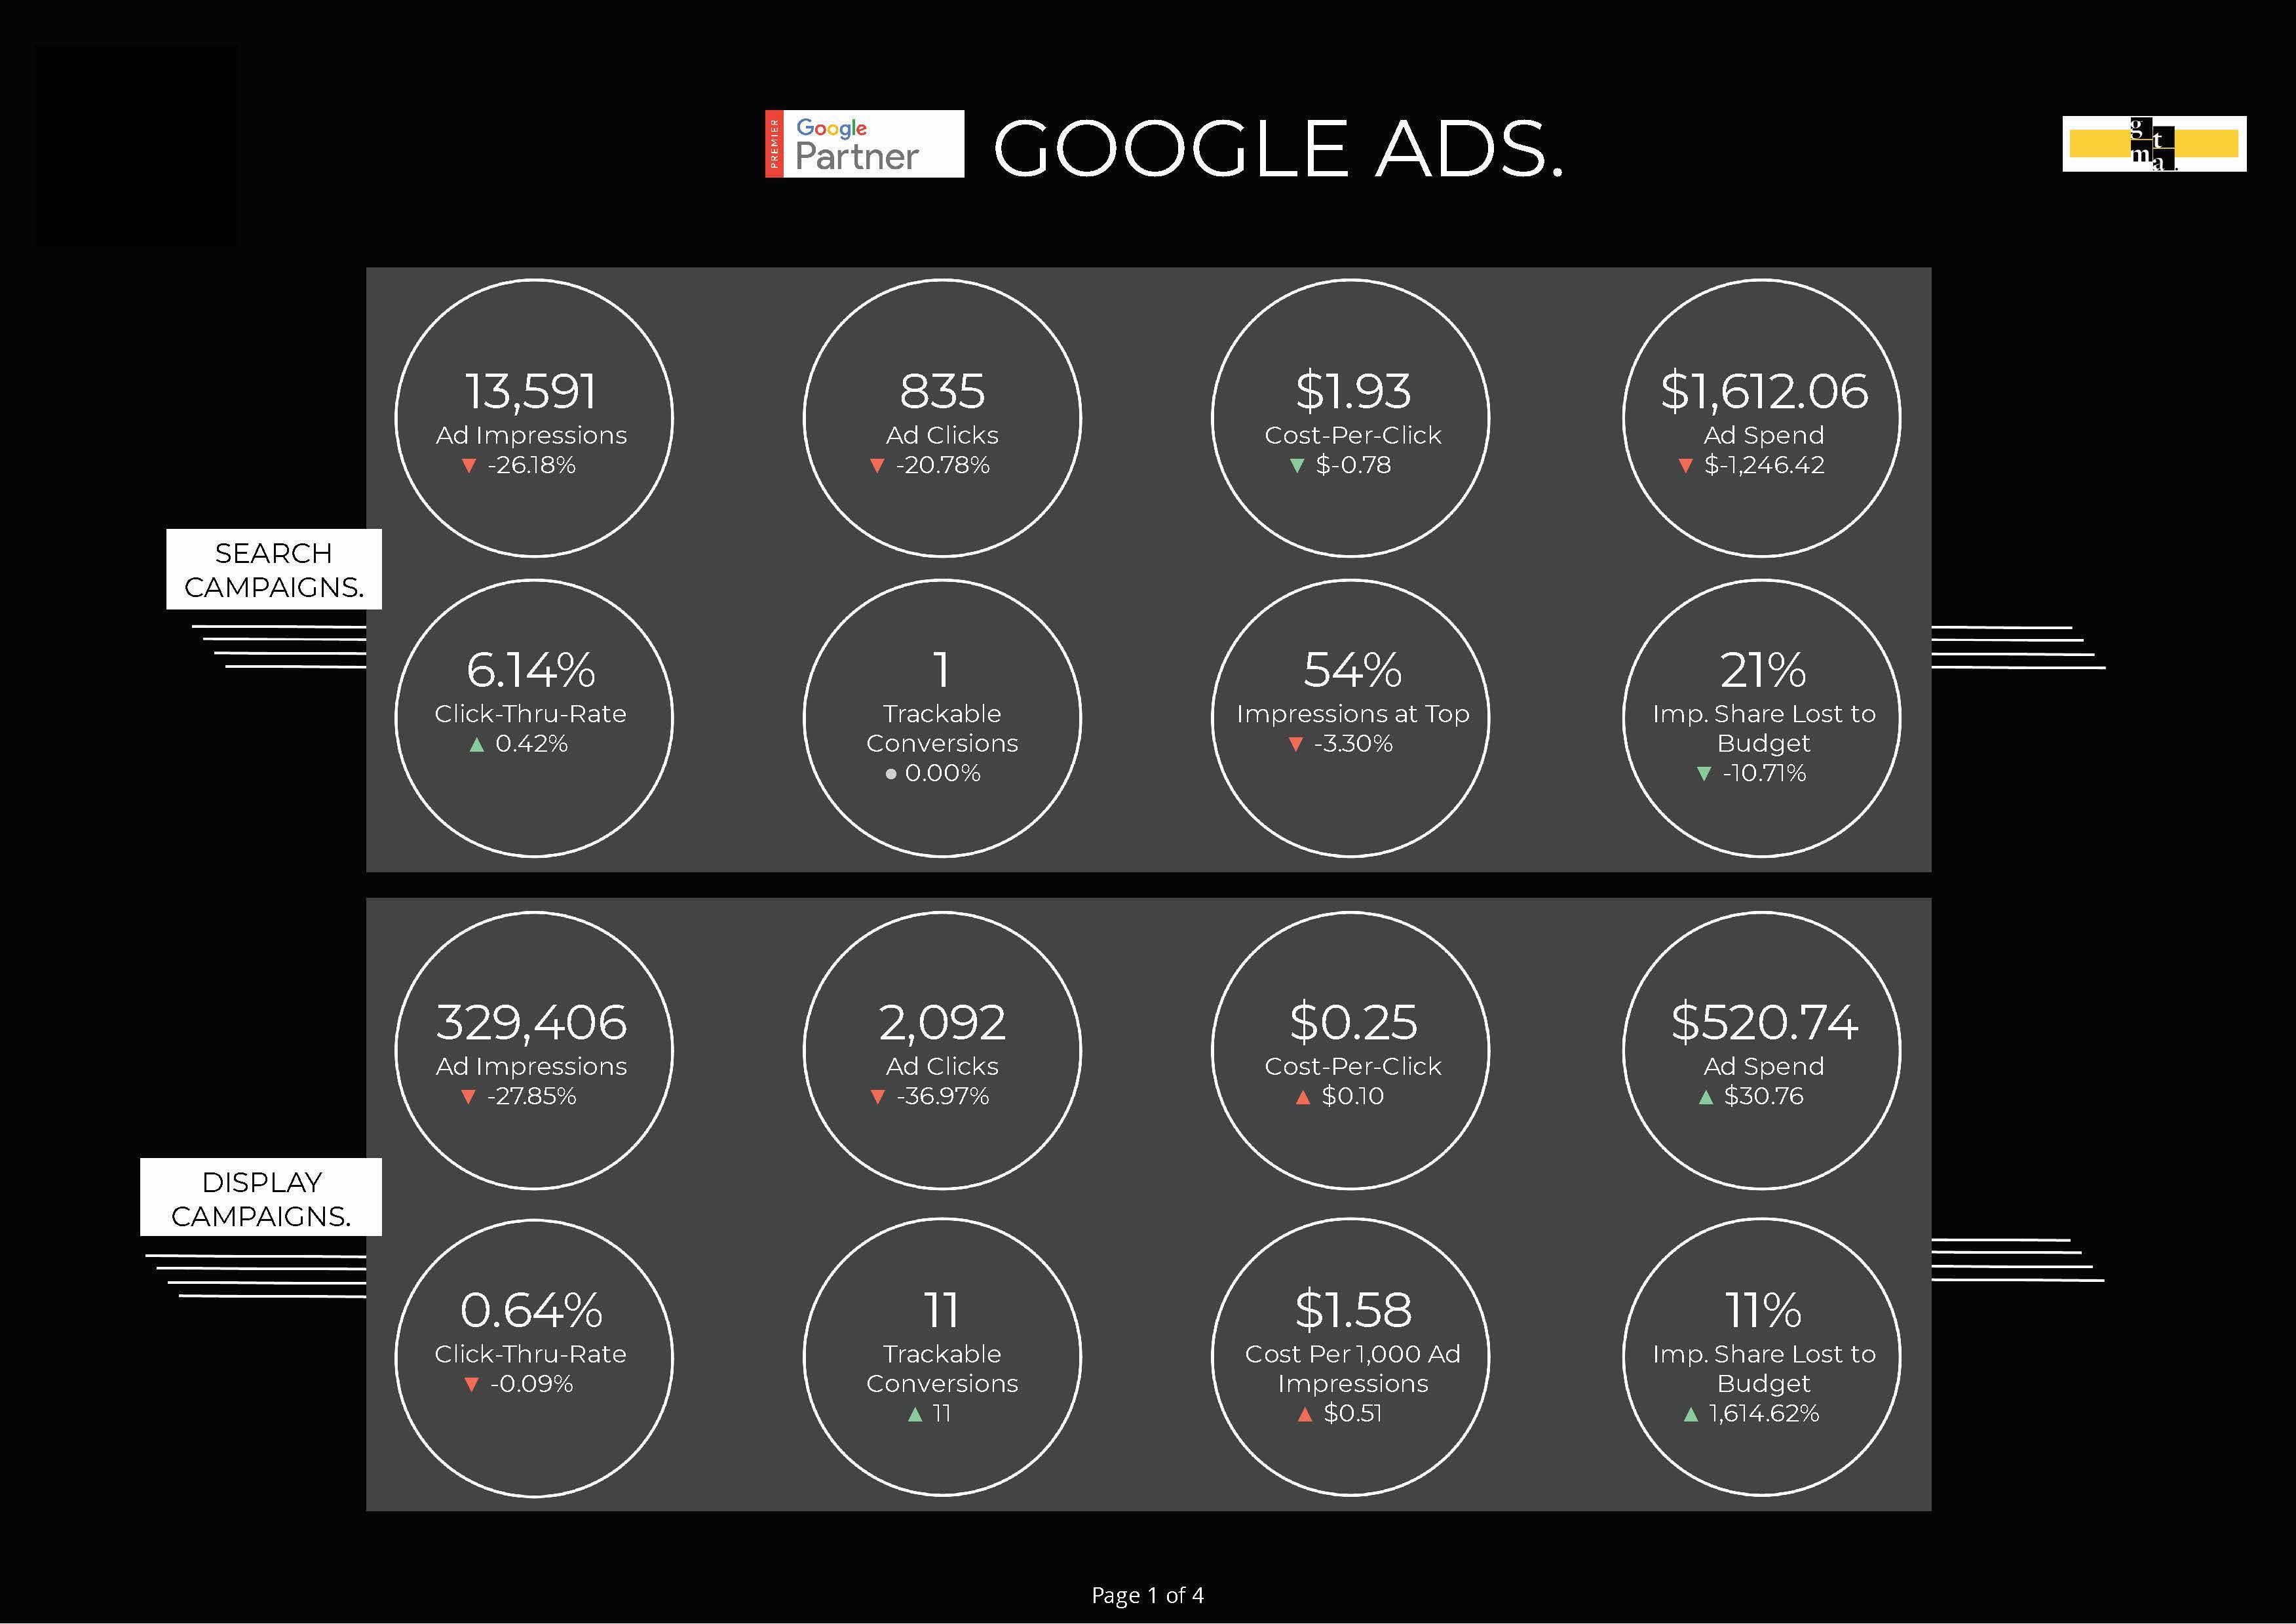 Google Ads metrics comparing search campaigns versus display campaigns.